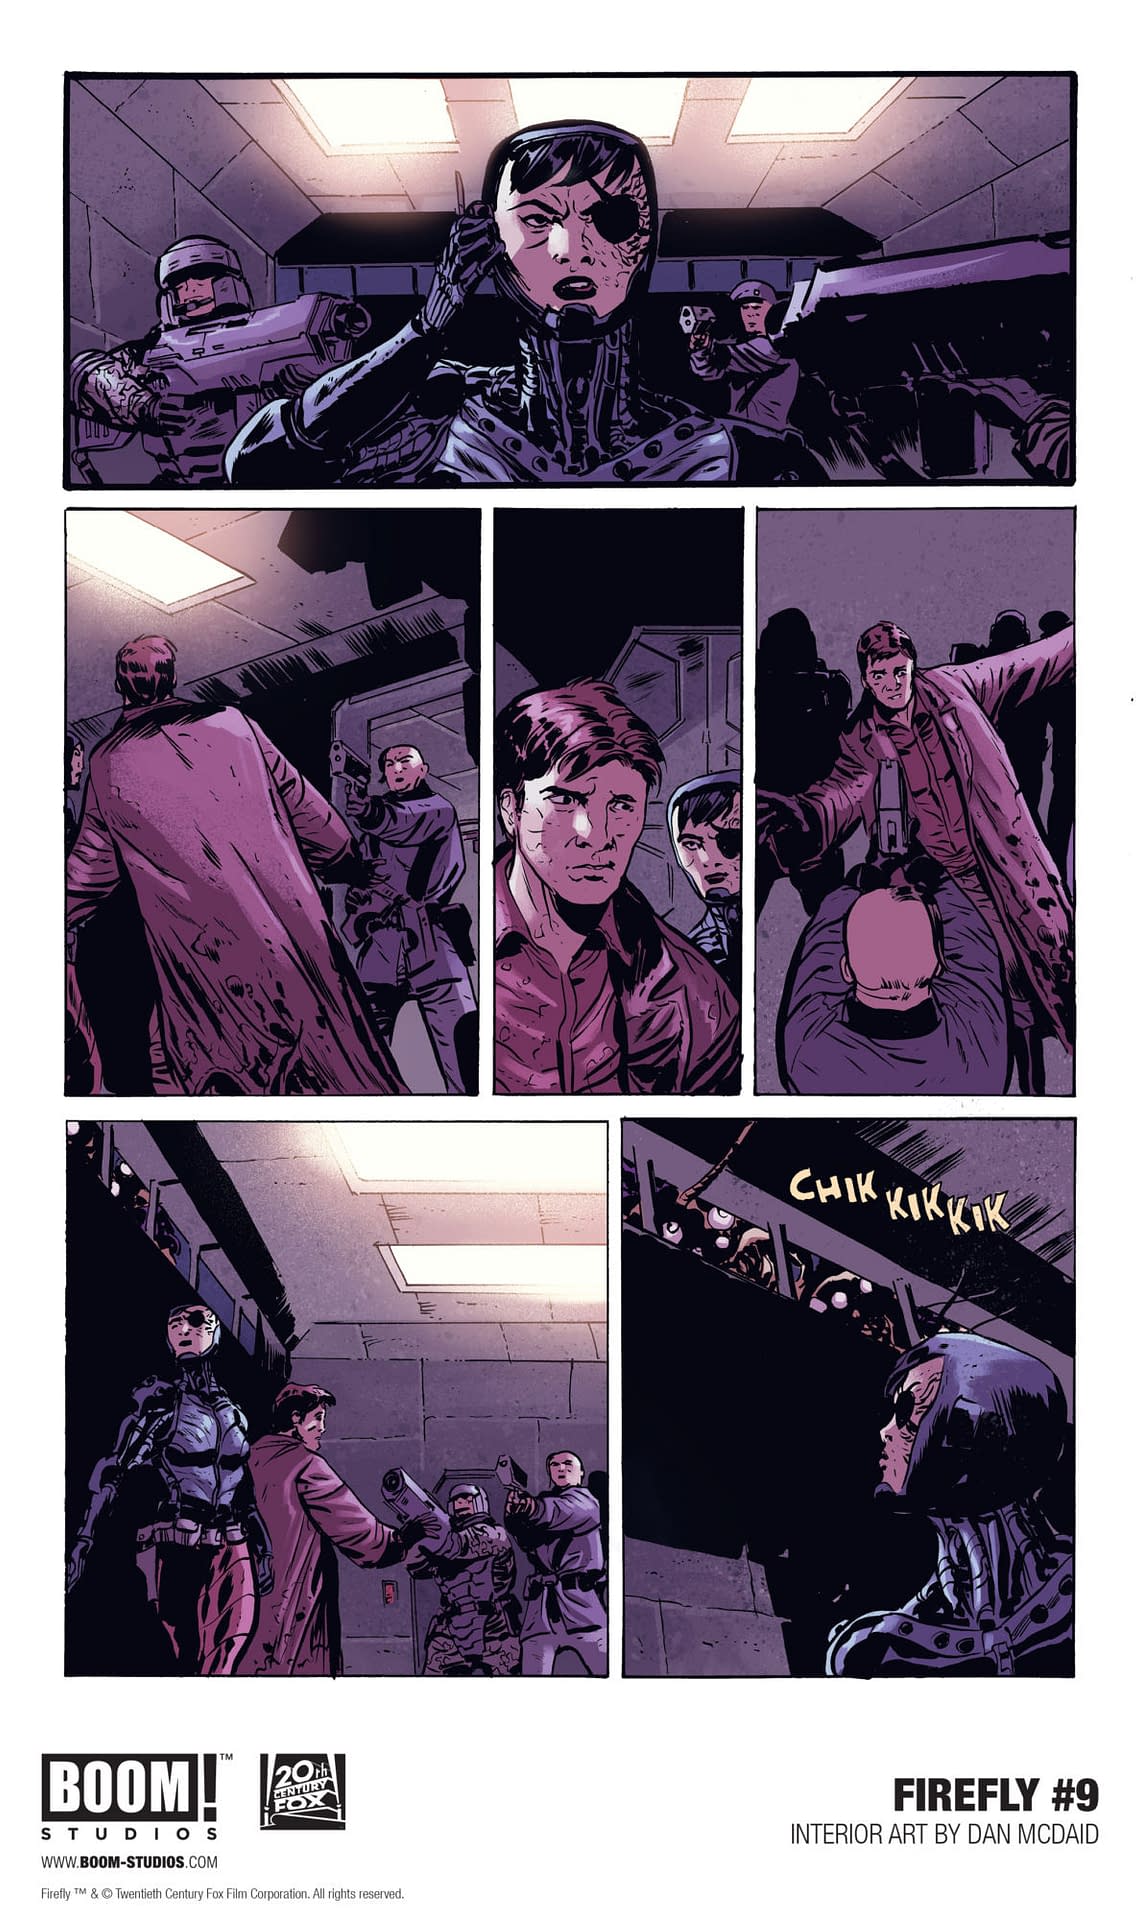 5 Pages From September's Firefly #9